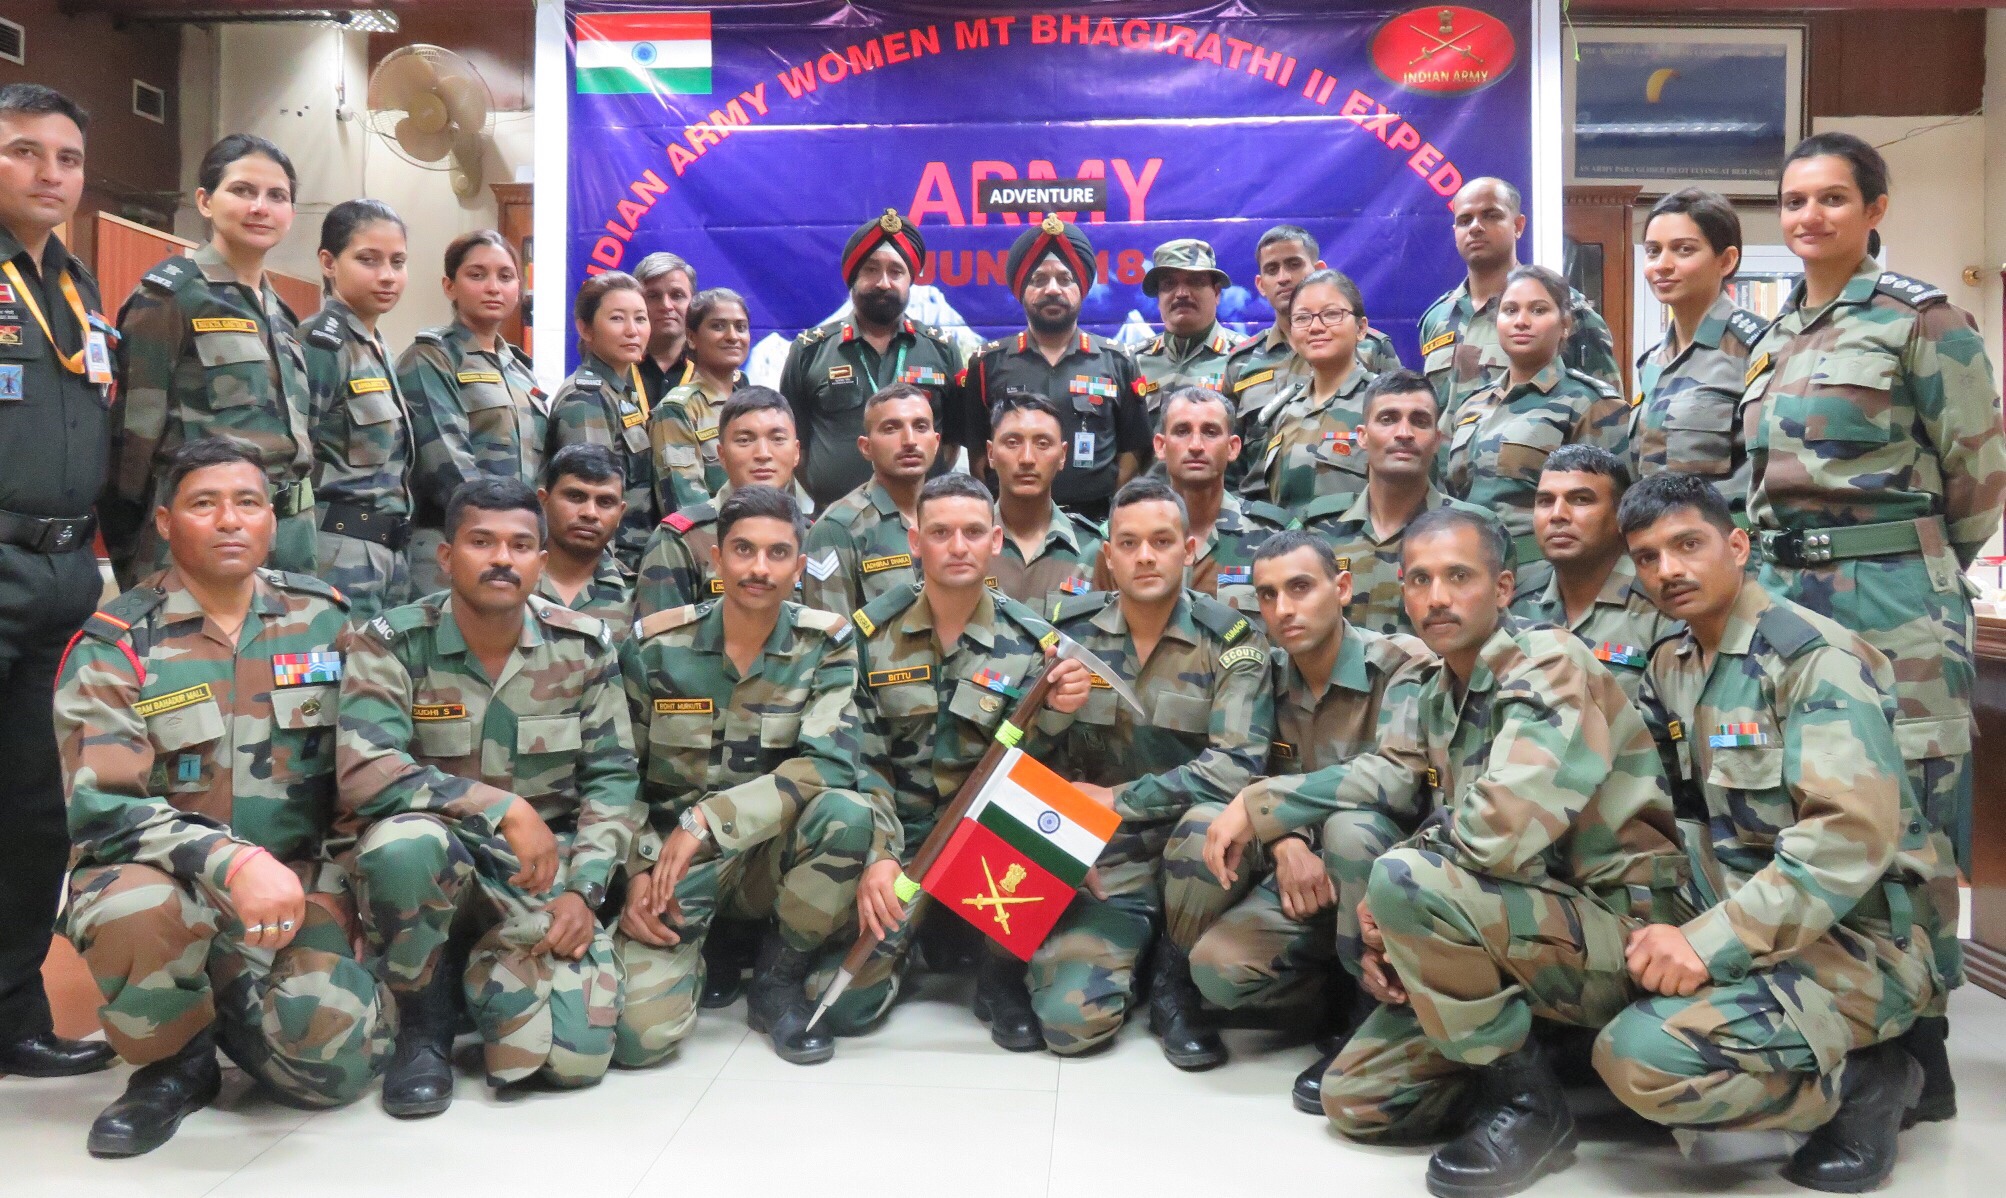 Indian Army Women Officers off to Mt Bhagirathi II